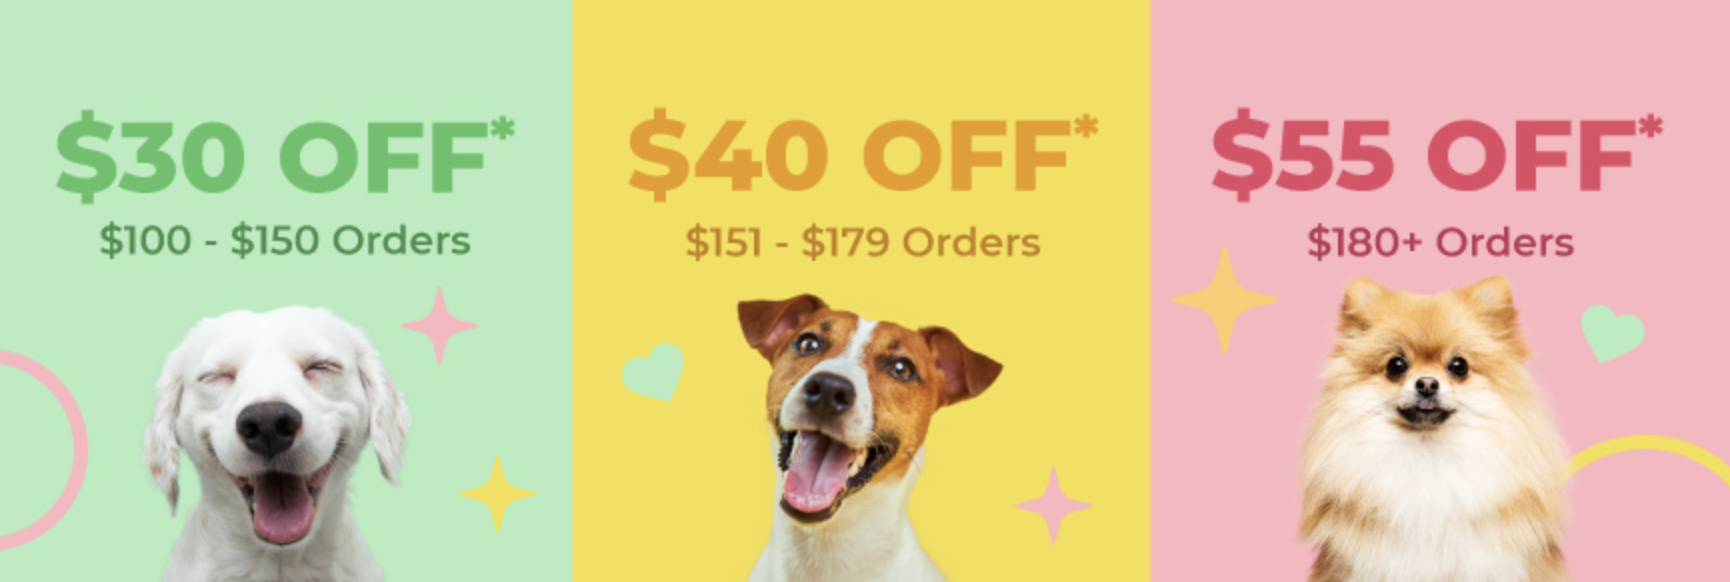 PetMeds: Up to $55 Off Sitewide + Free Shipping on $49+